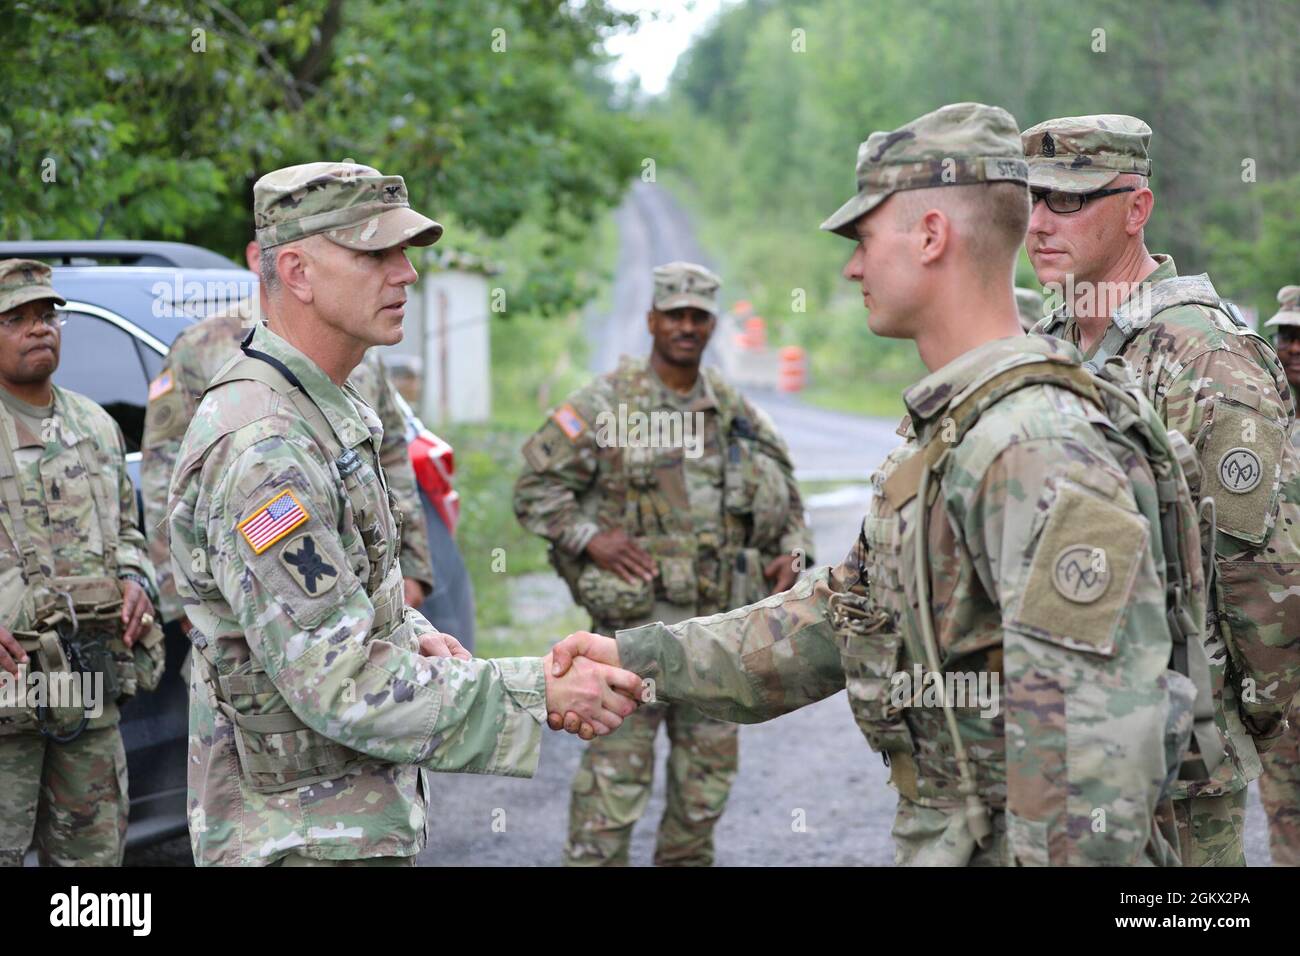 Spc. Ian Stewart, a combat engineer assigned to Bravo Company of the New York Army National Guard's 152nd Brigade Engineer Battalion, receives a challenge coin from Col. Sean Flynn, commander of the 27th Infantry Brigade Combat Team at Fort Drum, New York on July 14, 2021. Stewart, who is a vehicle driver, was recognized for outstanding performance while his unit conducted demolition training. Stock Photo